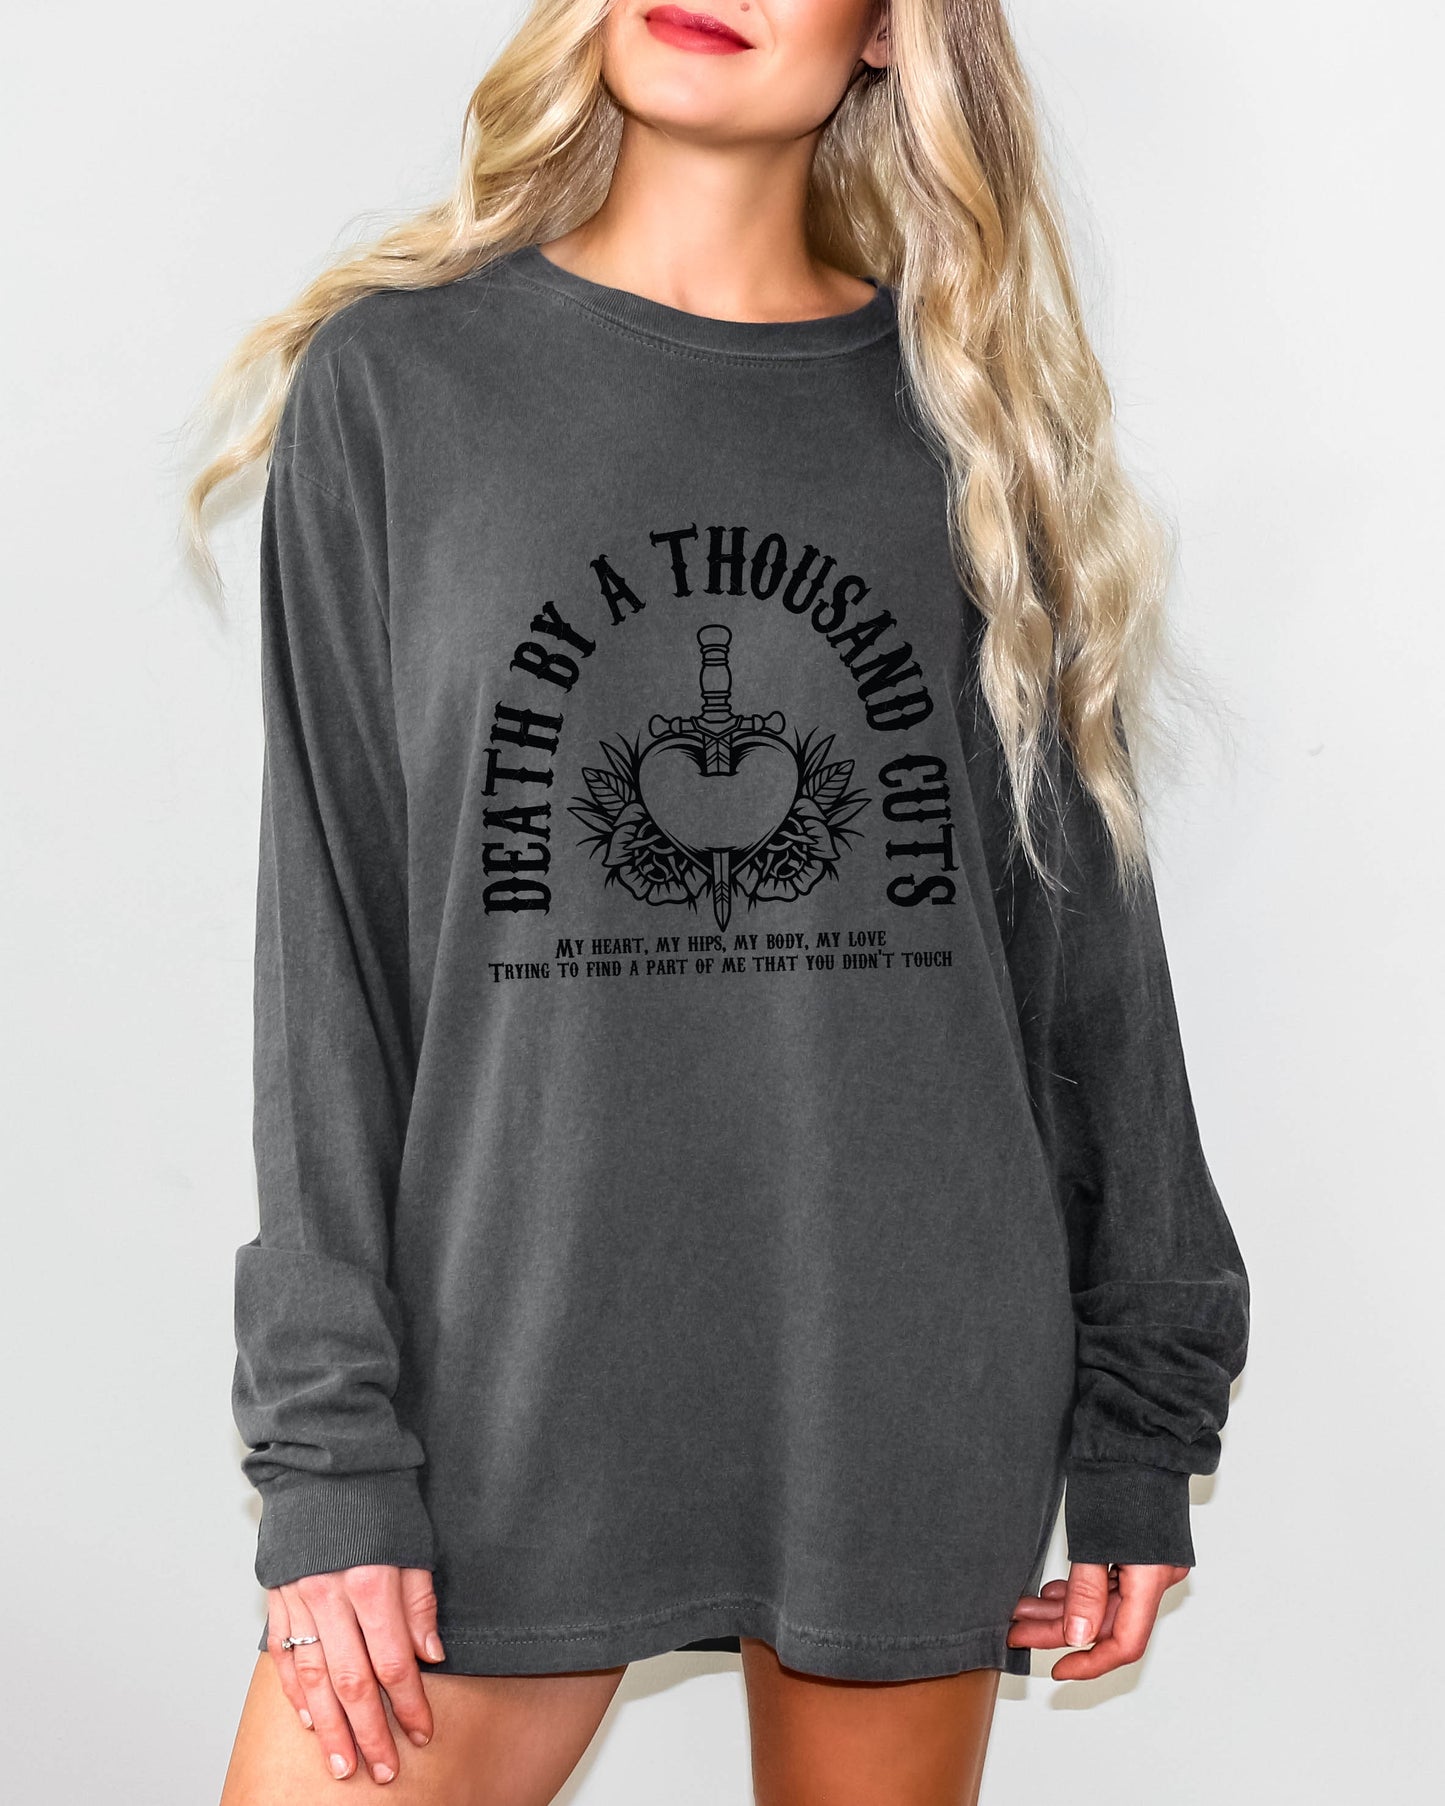 Death By A Thousand Cuts Taylor Swift Long Sleeve Shirt